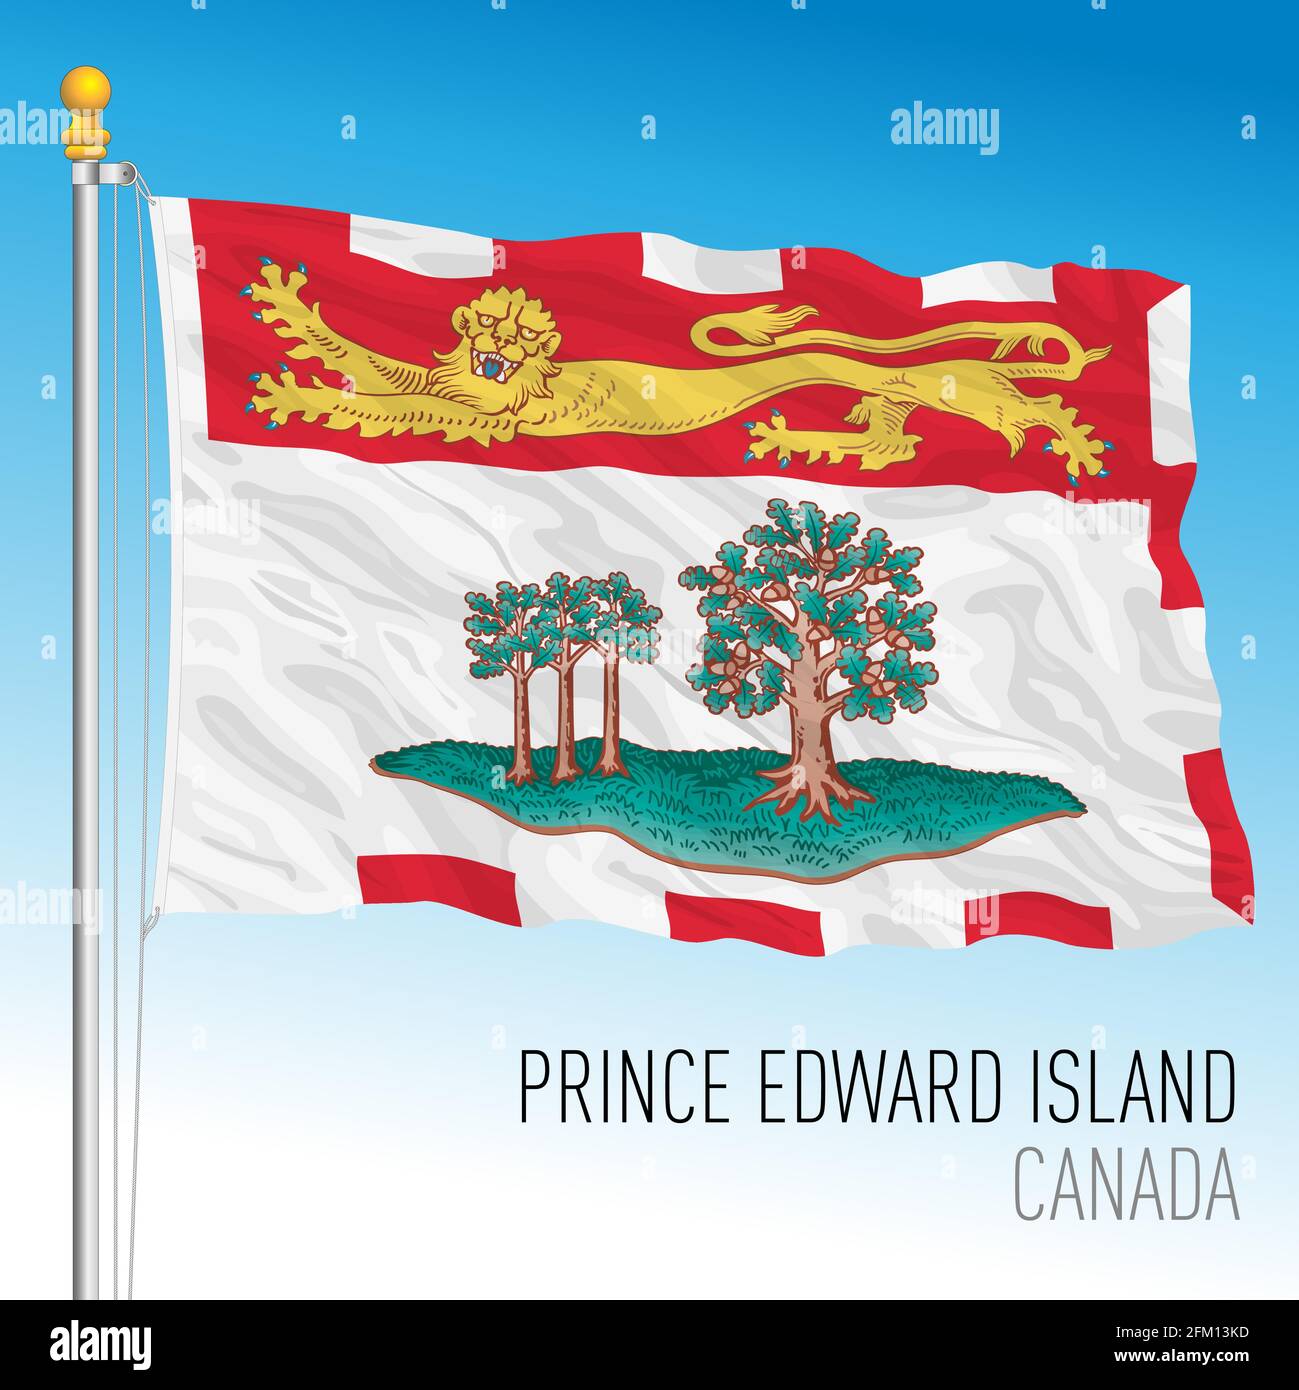 Prince Edward Island territorial and regional flag, Canada, north american country, vector illustration Stock Vector